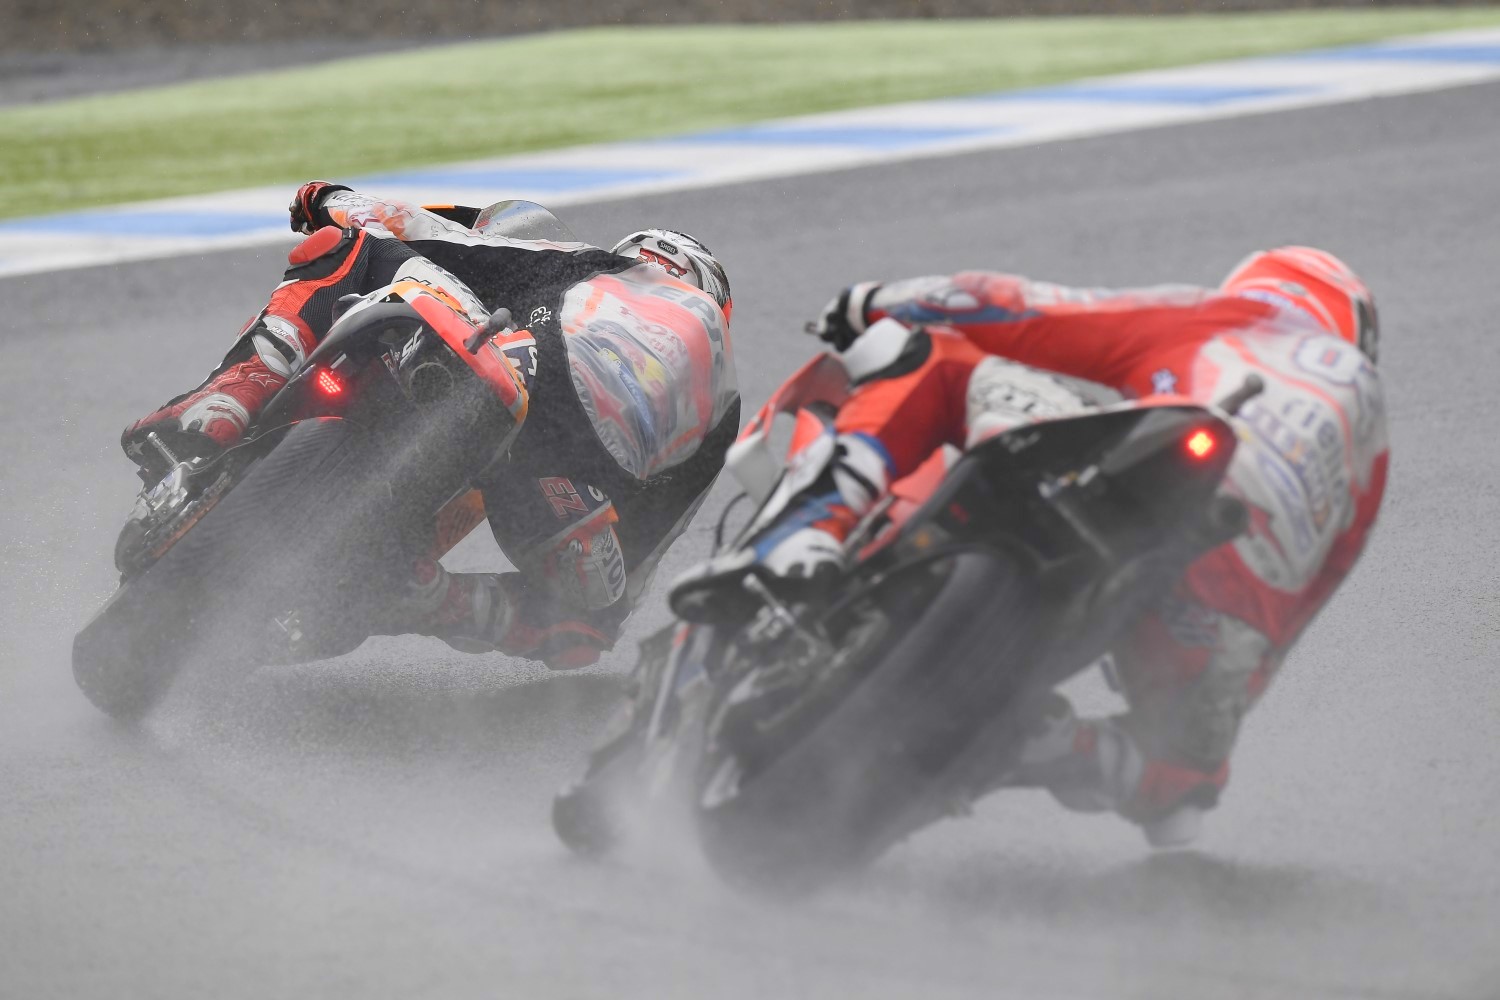 Marquez being hounded by Dovizioso